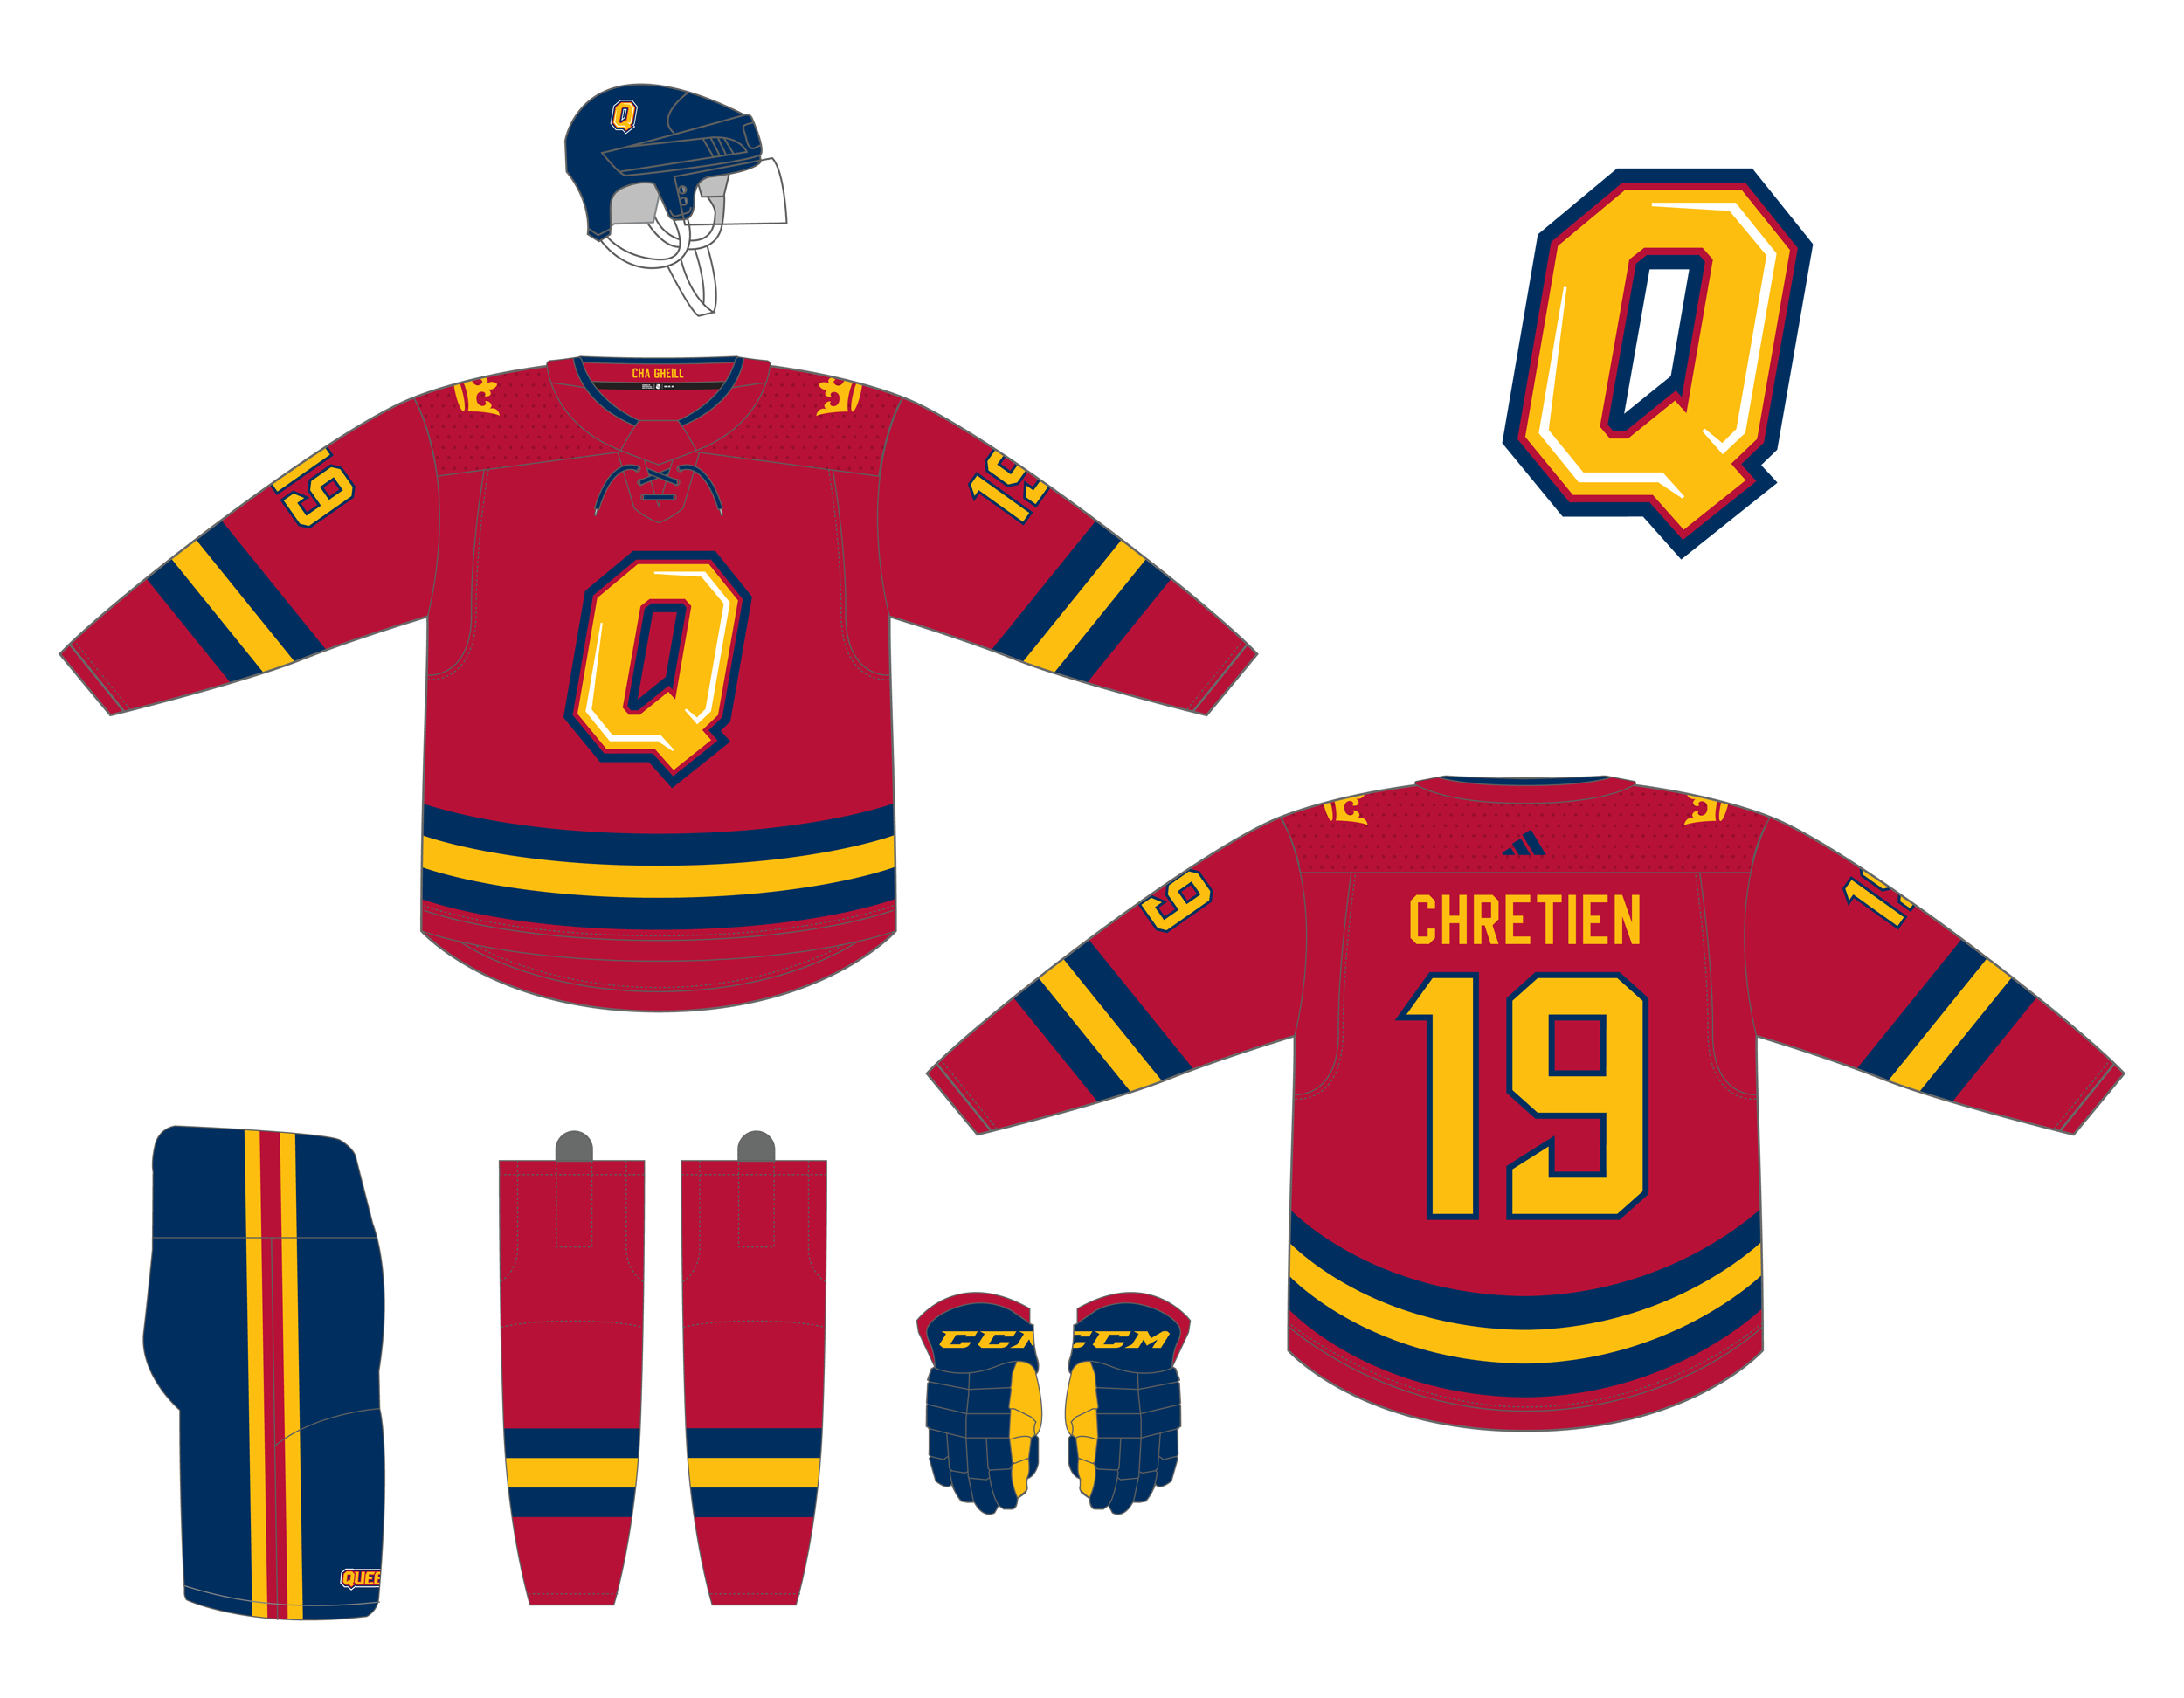 NHL Jerseys and General Concept Design Talk - Page 3 - Around the